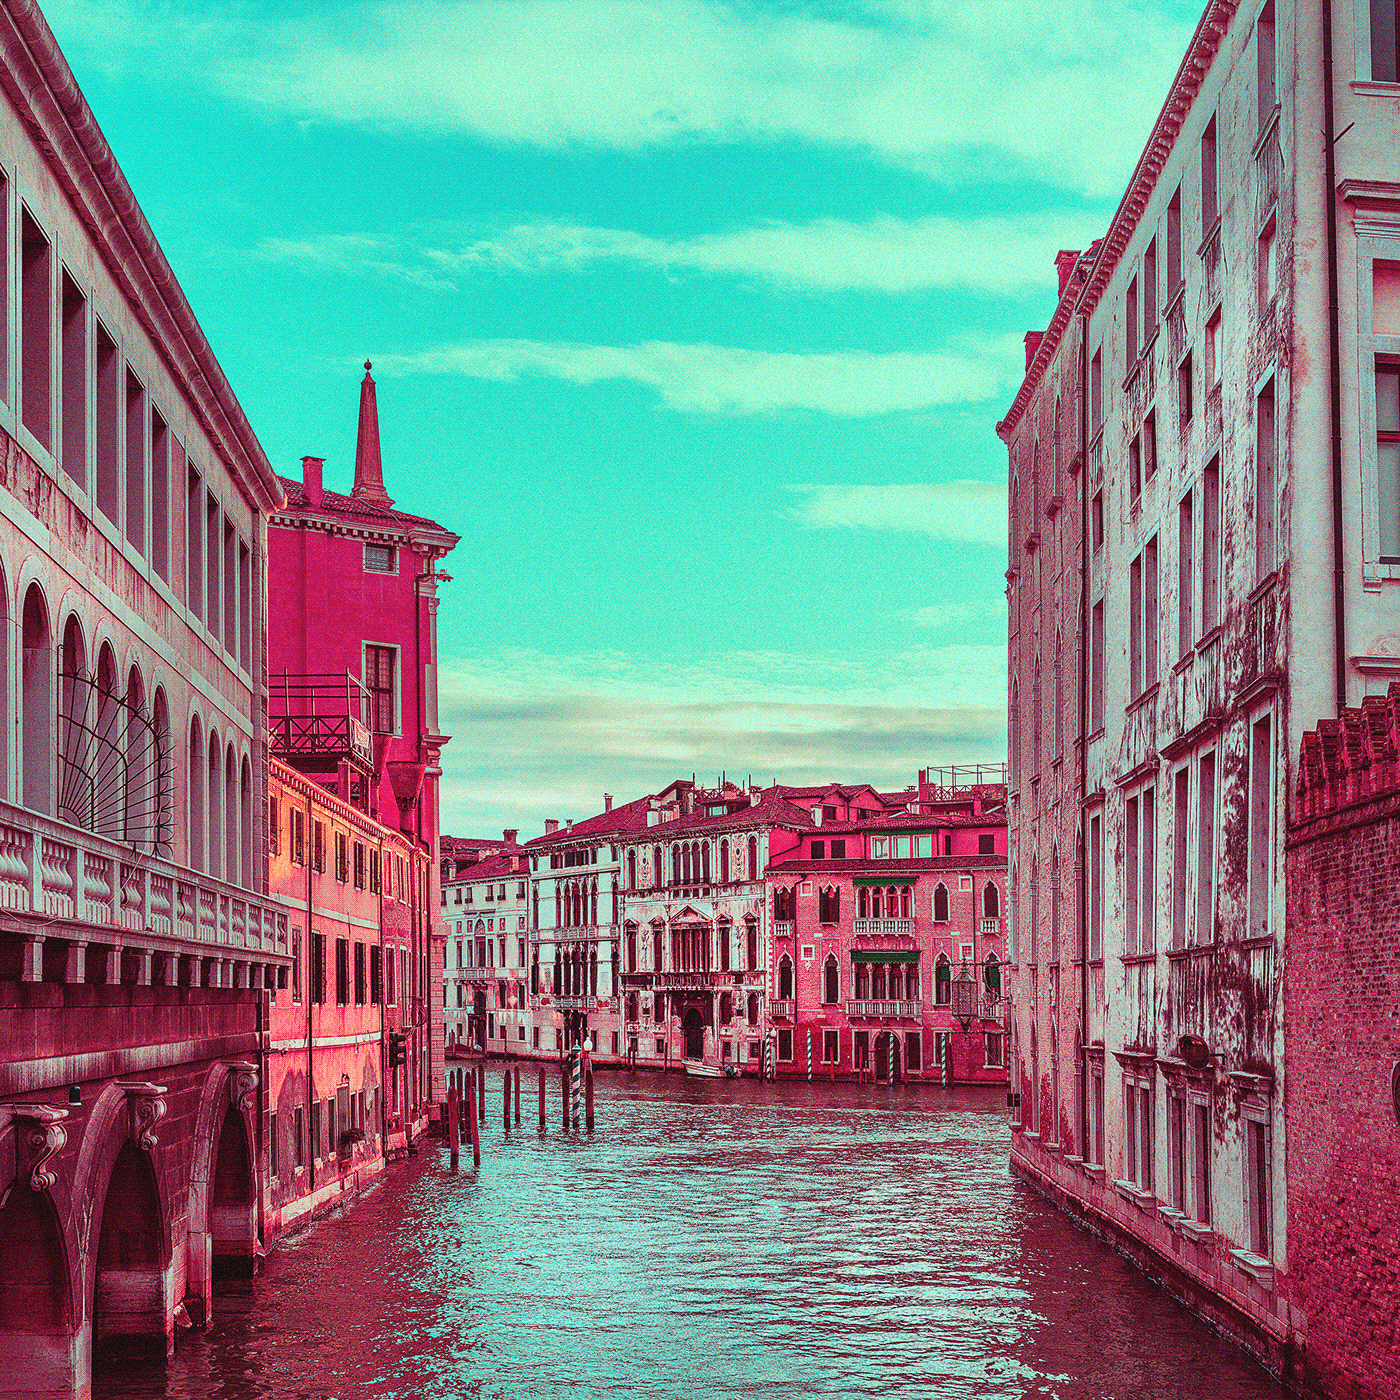 WATERWAY is the colored image for the alternative process. The location is Venice, ITALY.
